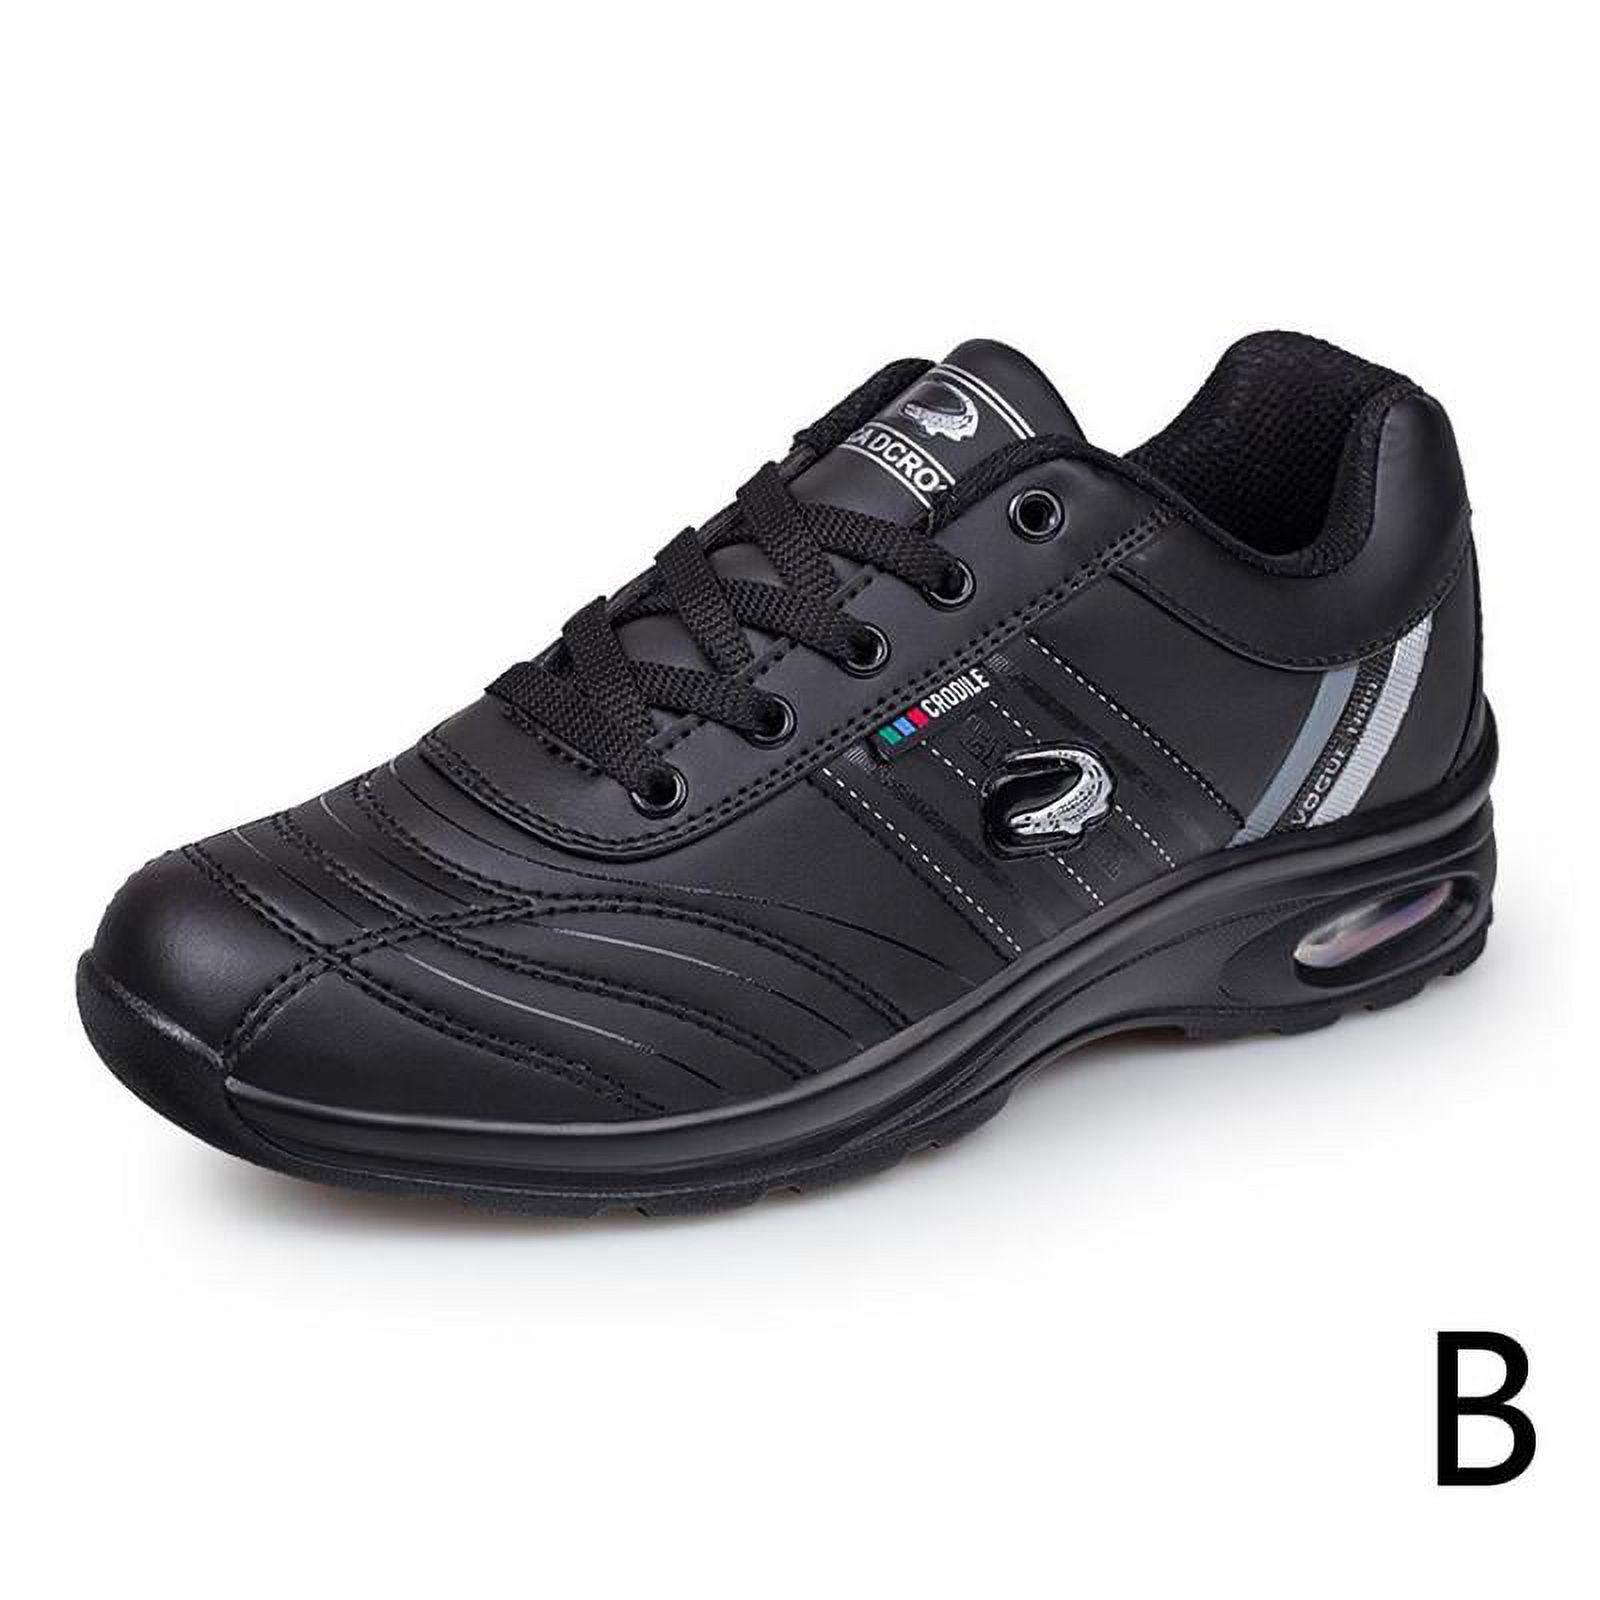 New Men's Golf Shoes Lightweight Men Shoes Golf Waterproof Anti-slip Shoes Golf Shoes Breathable Sports Shoes - image 1 of 1